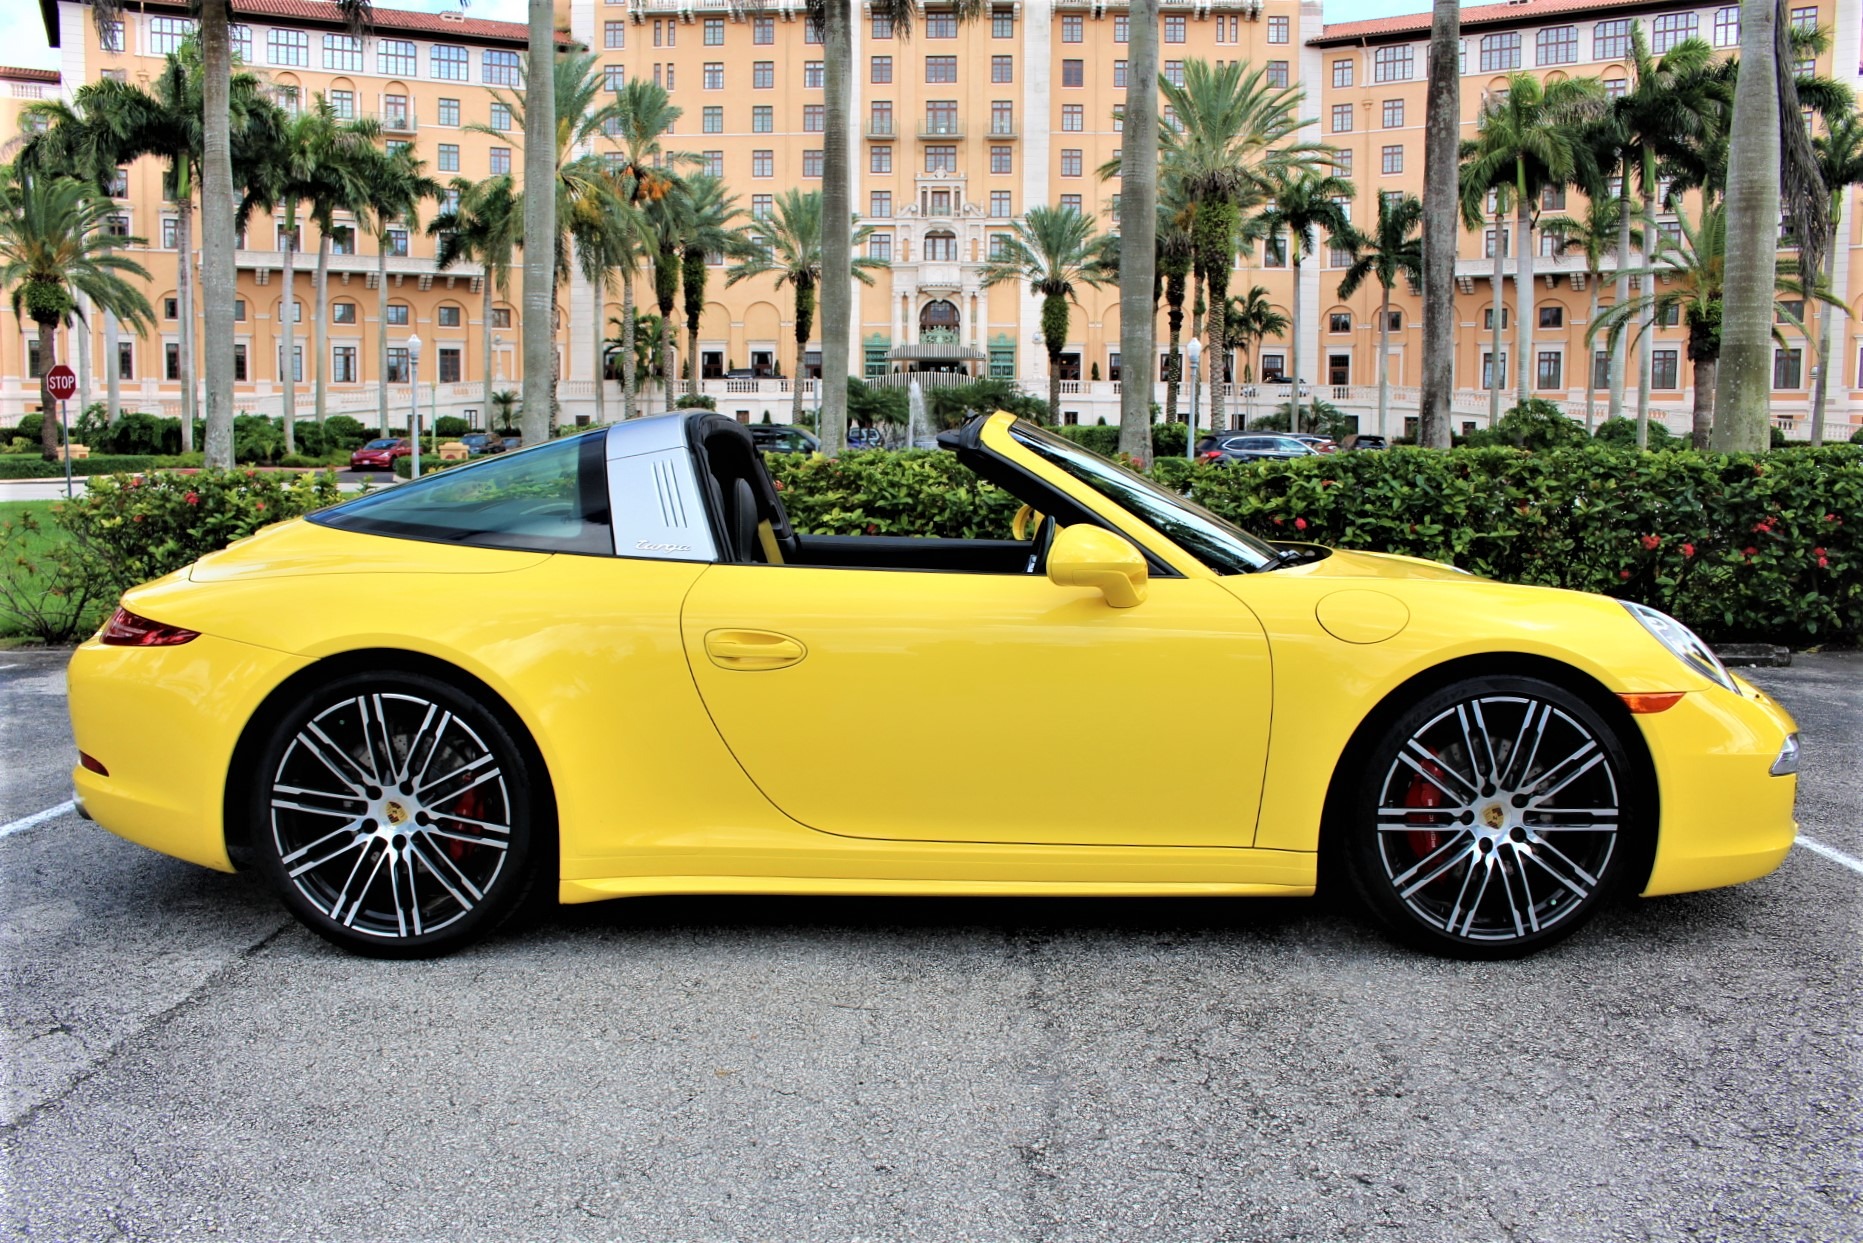 Used 2015 Porsche 911 Targa 4S Exclusive Edition for sale Sold at The Gables Sports Cars in Miami FL 33146 1